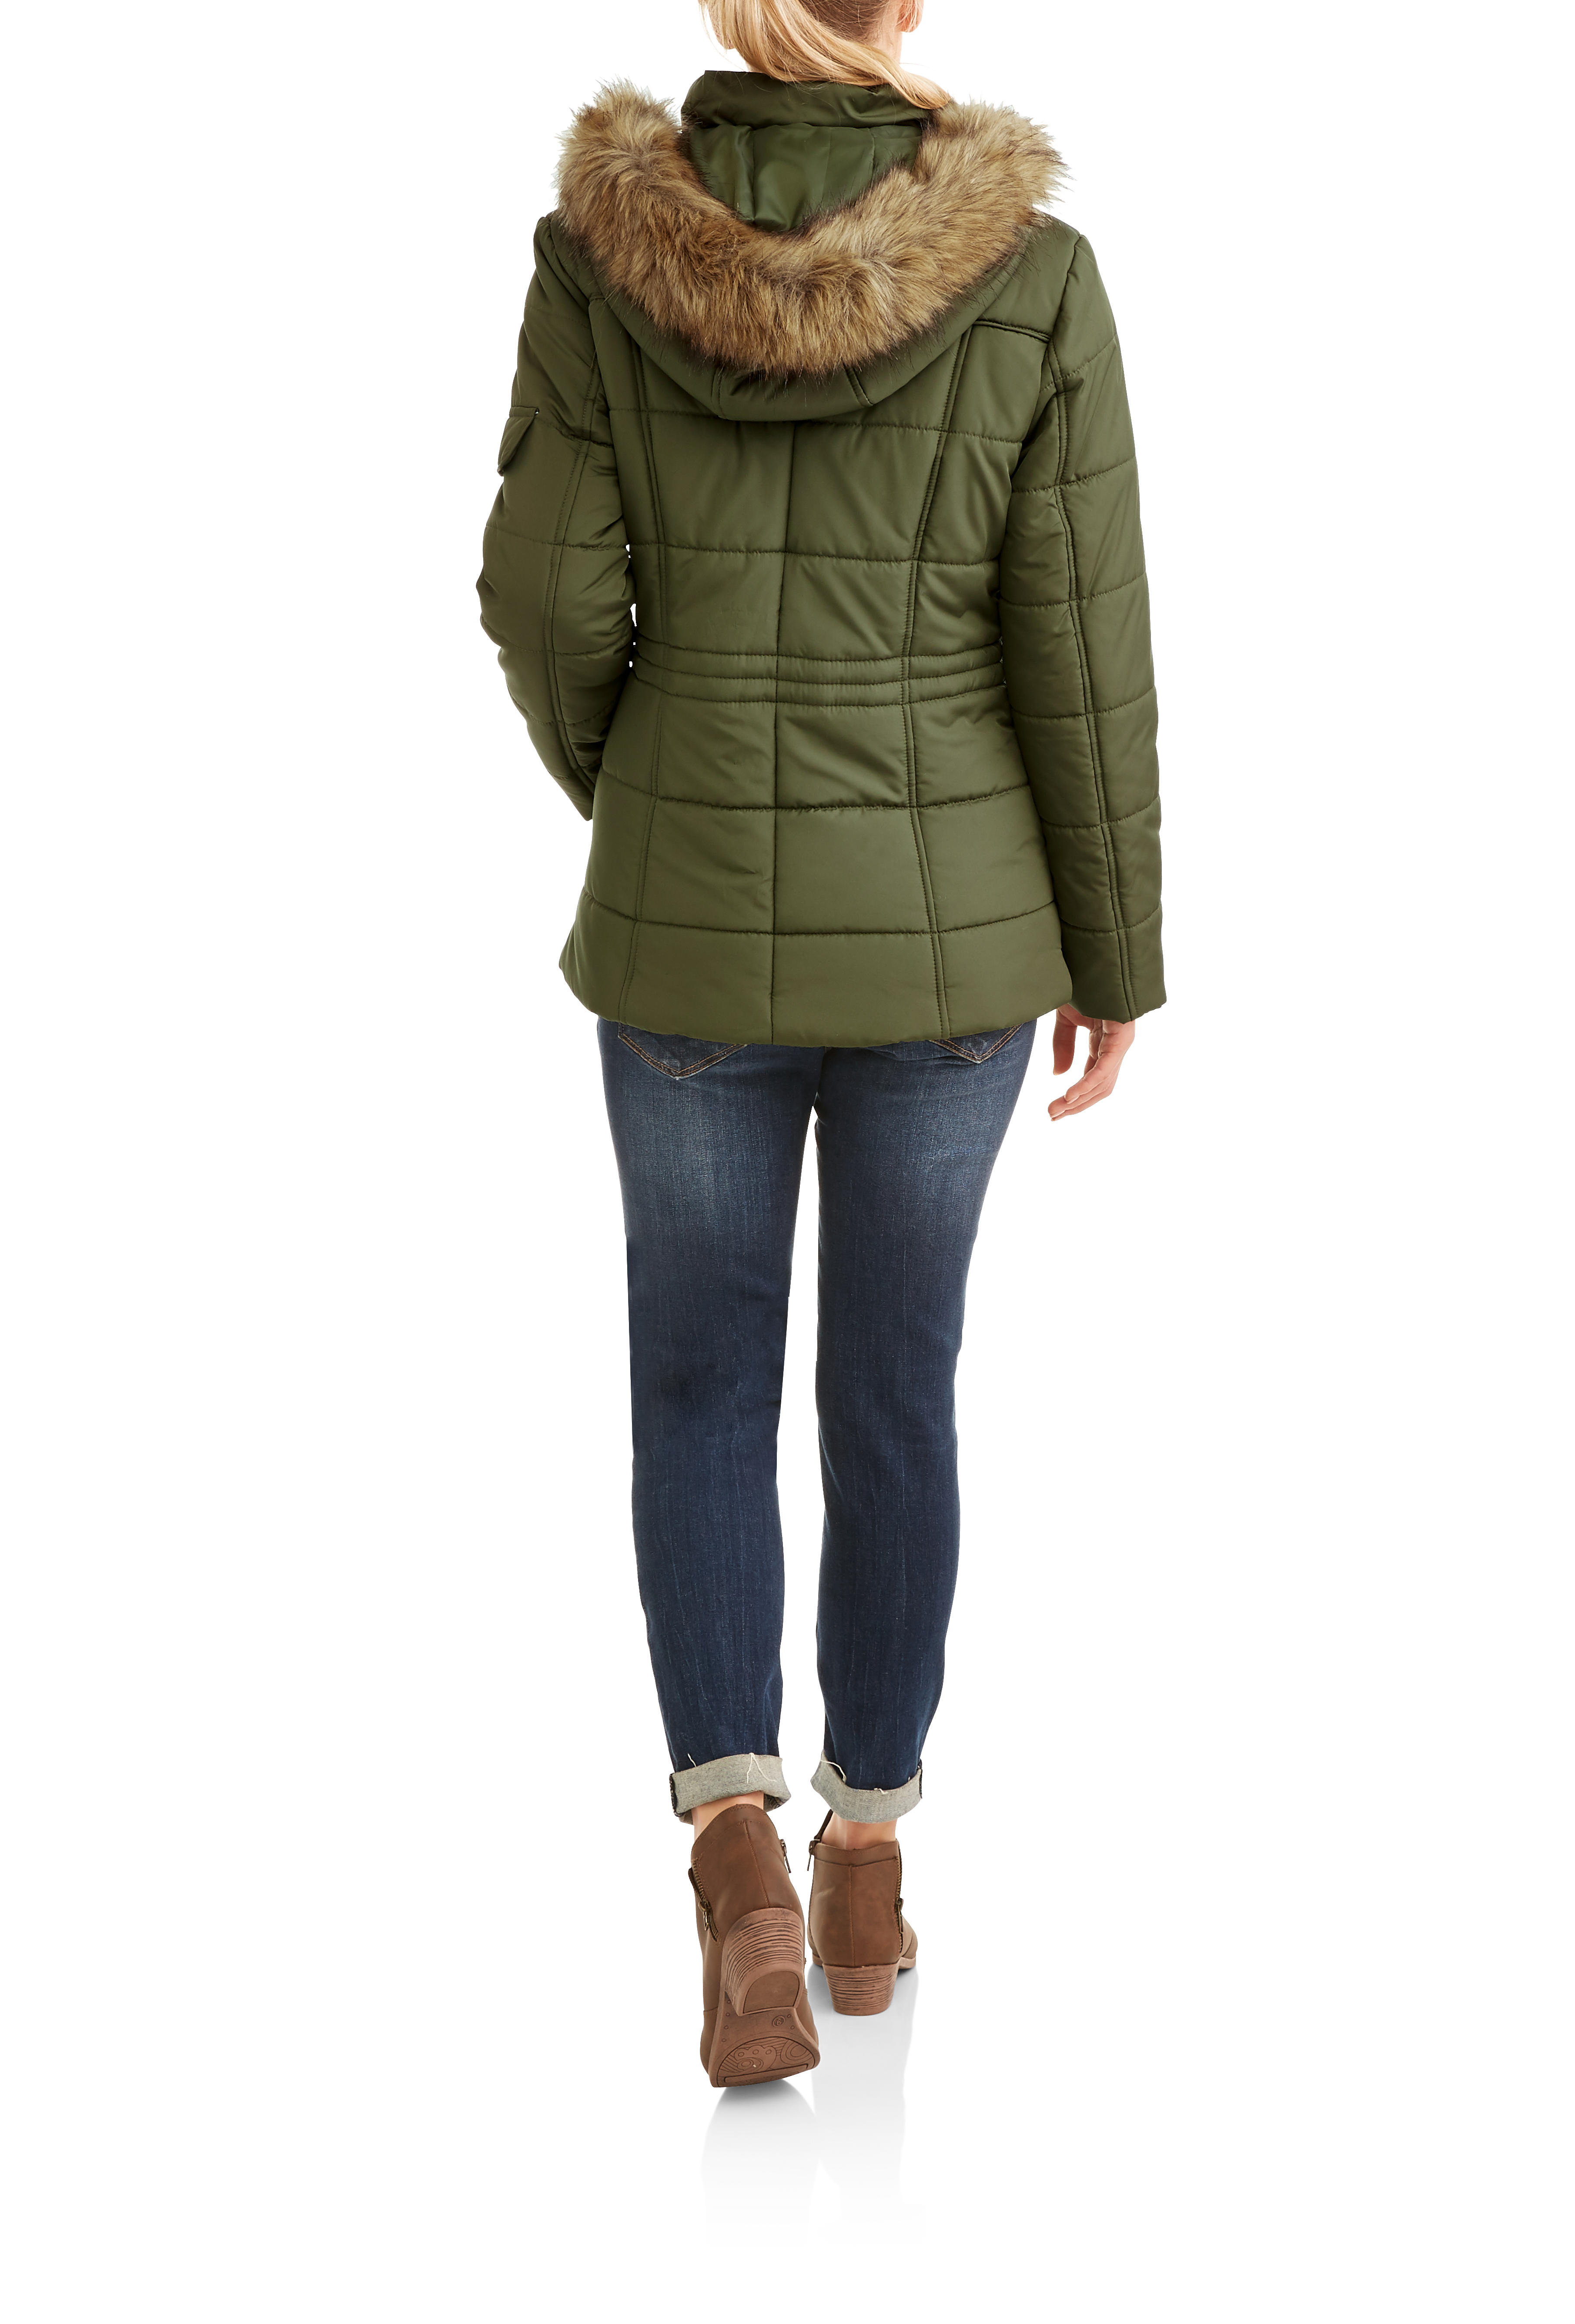 Faded Glory Missy Quilted Puffer Jacket - image 2 of 4